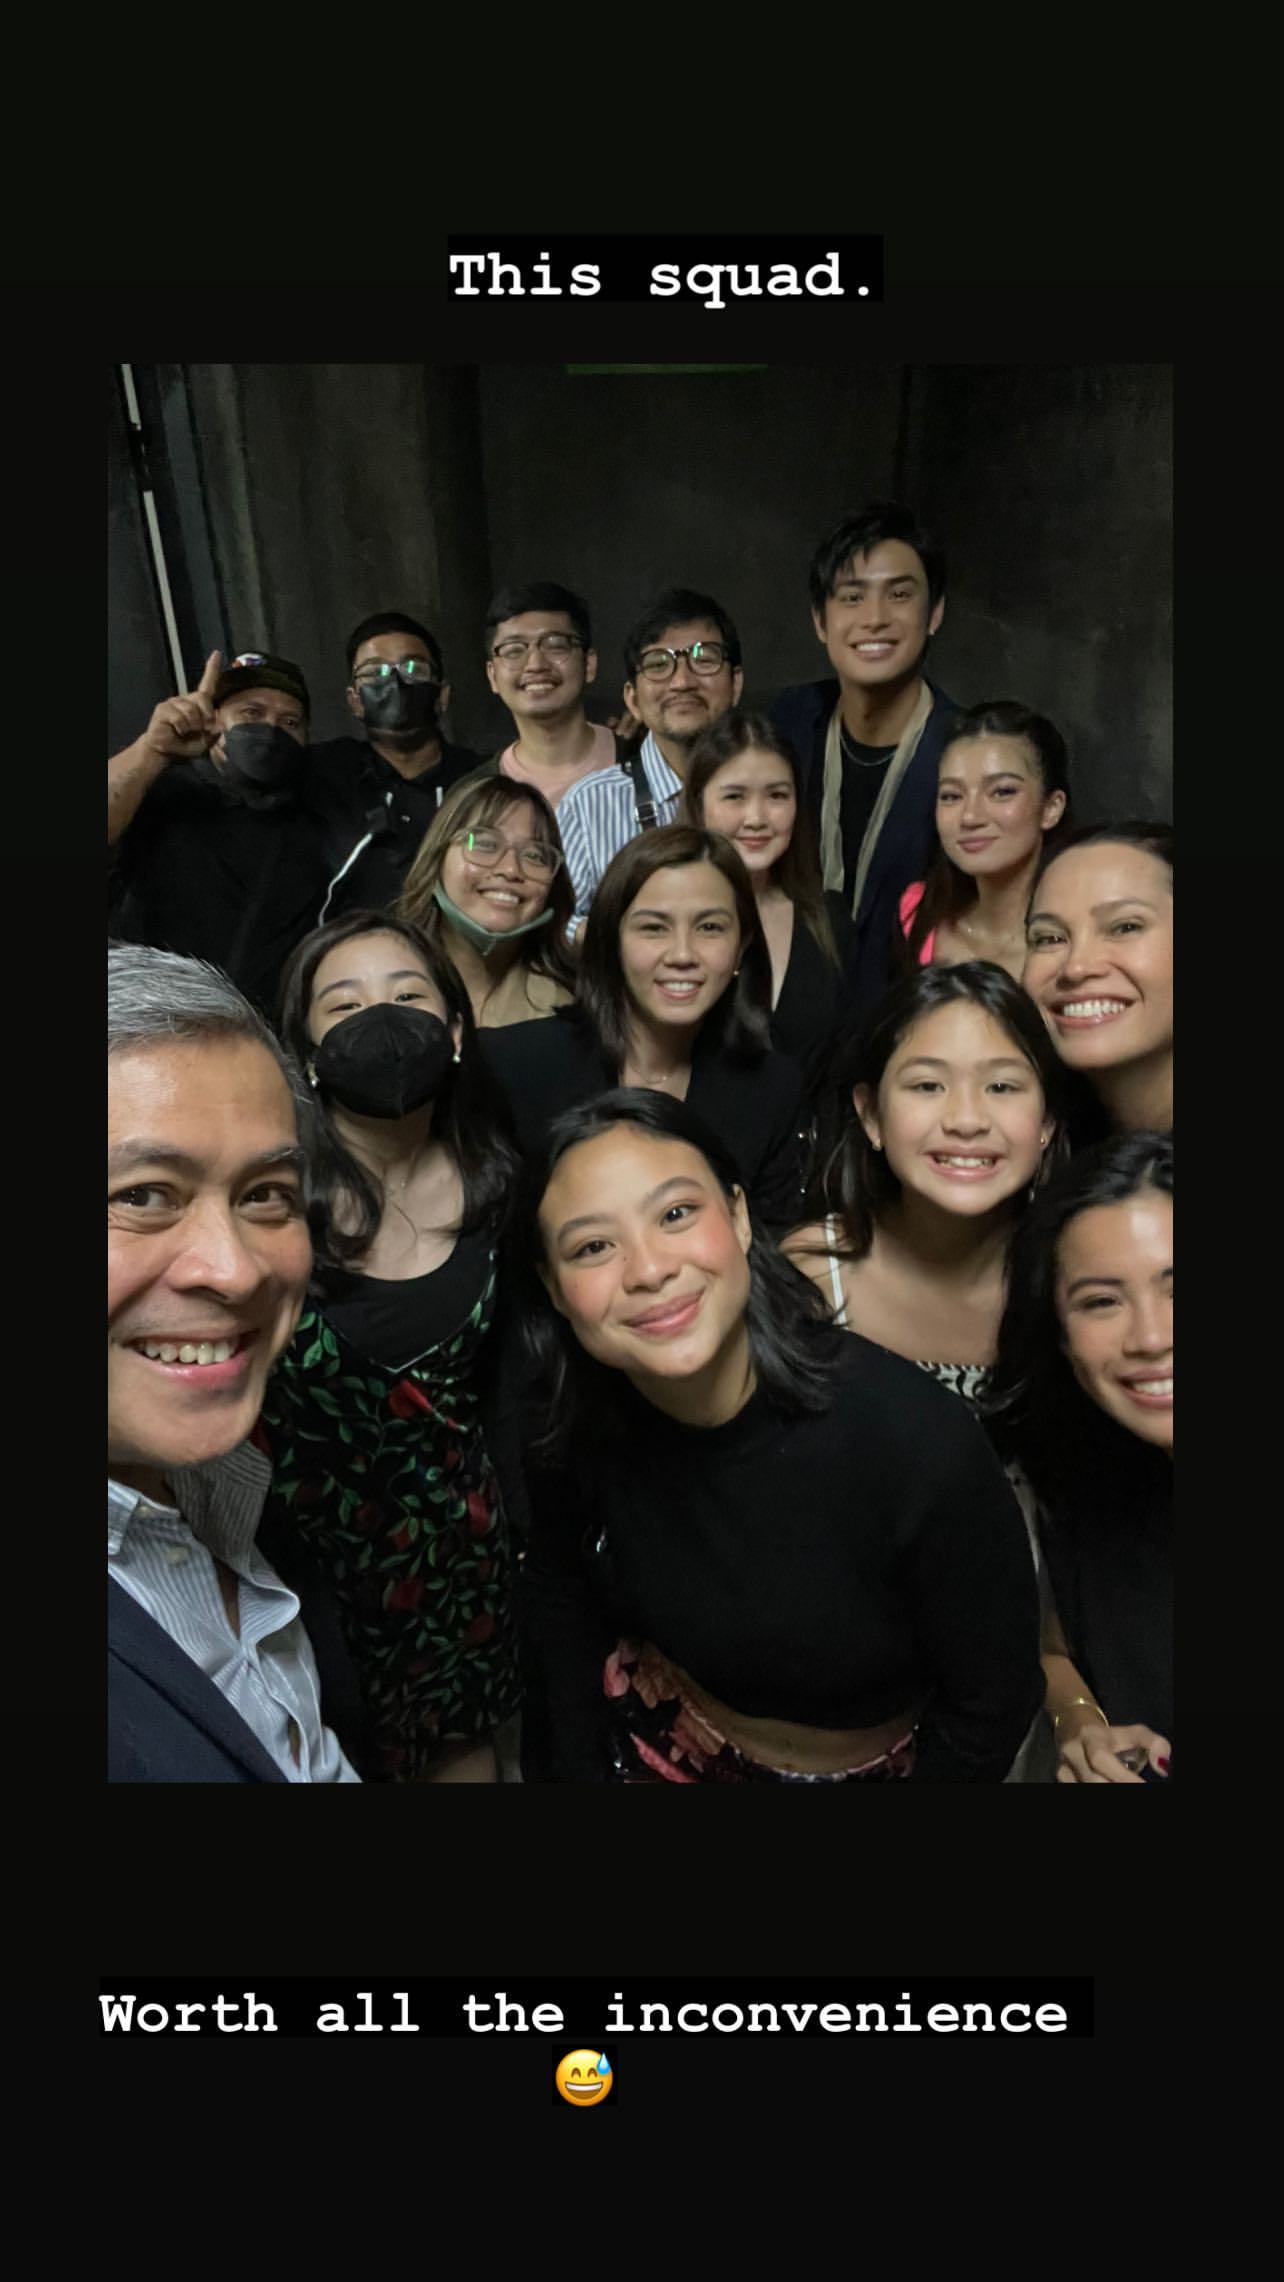 Donny Pangilinan and Belle Mariano aka DonBelle and their families